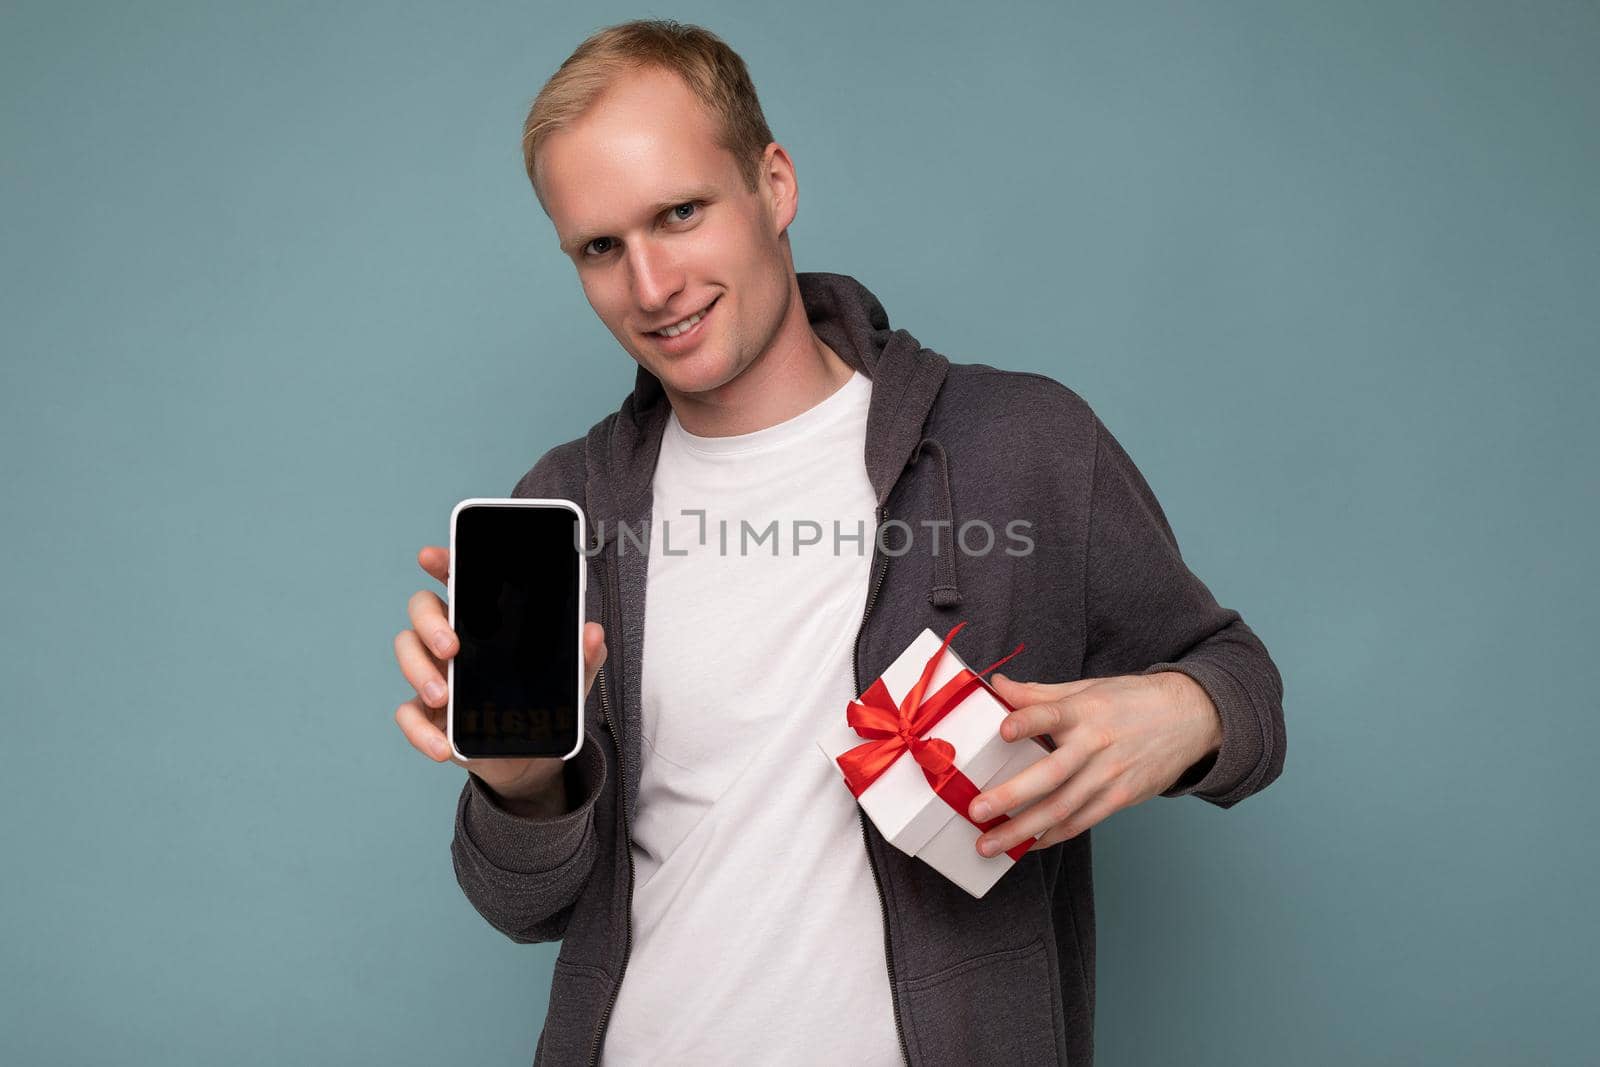 Photo of smiling cool handsome happy young man wearing grey sweater and white t-shirt standing isolated over blue background wall holding smartphone and showing phone with empty screen display and gift white box with red ribbon looking at camera.